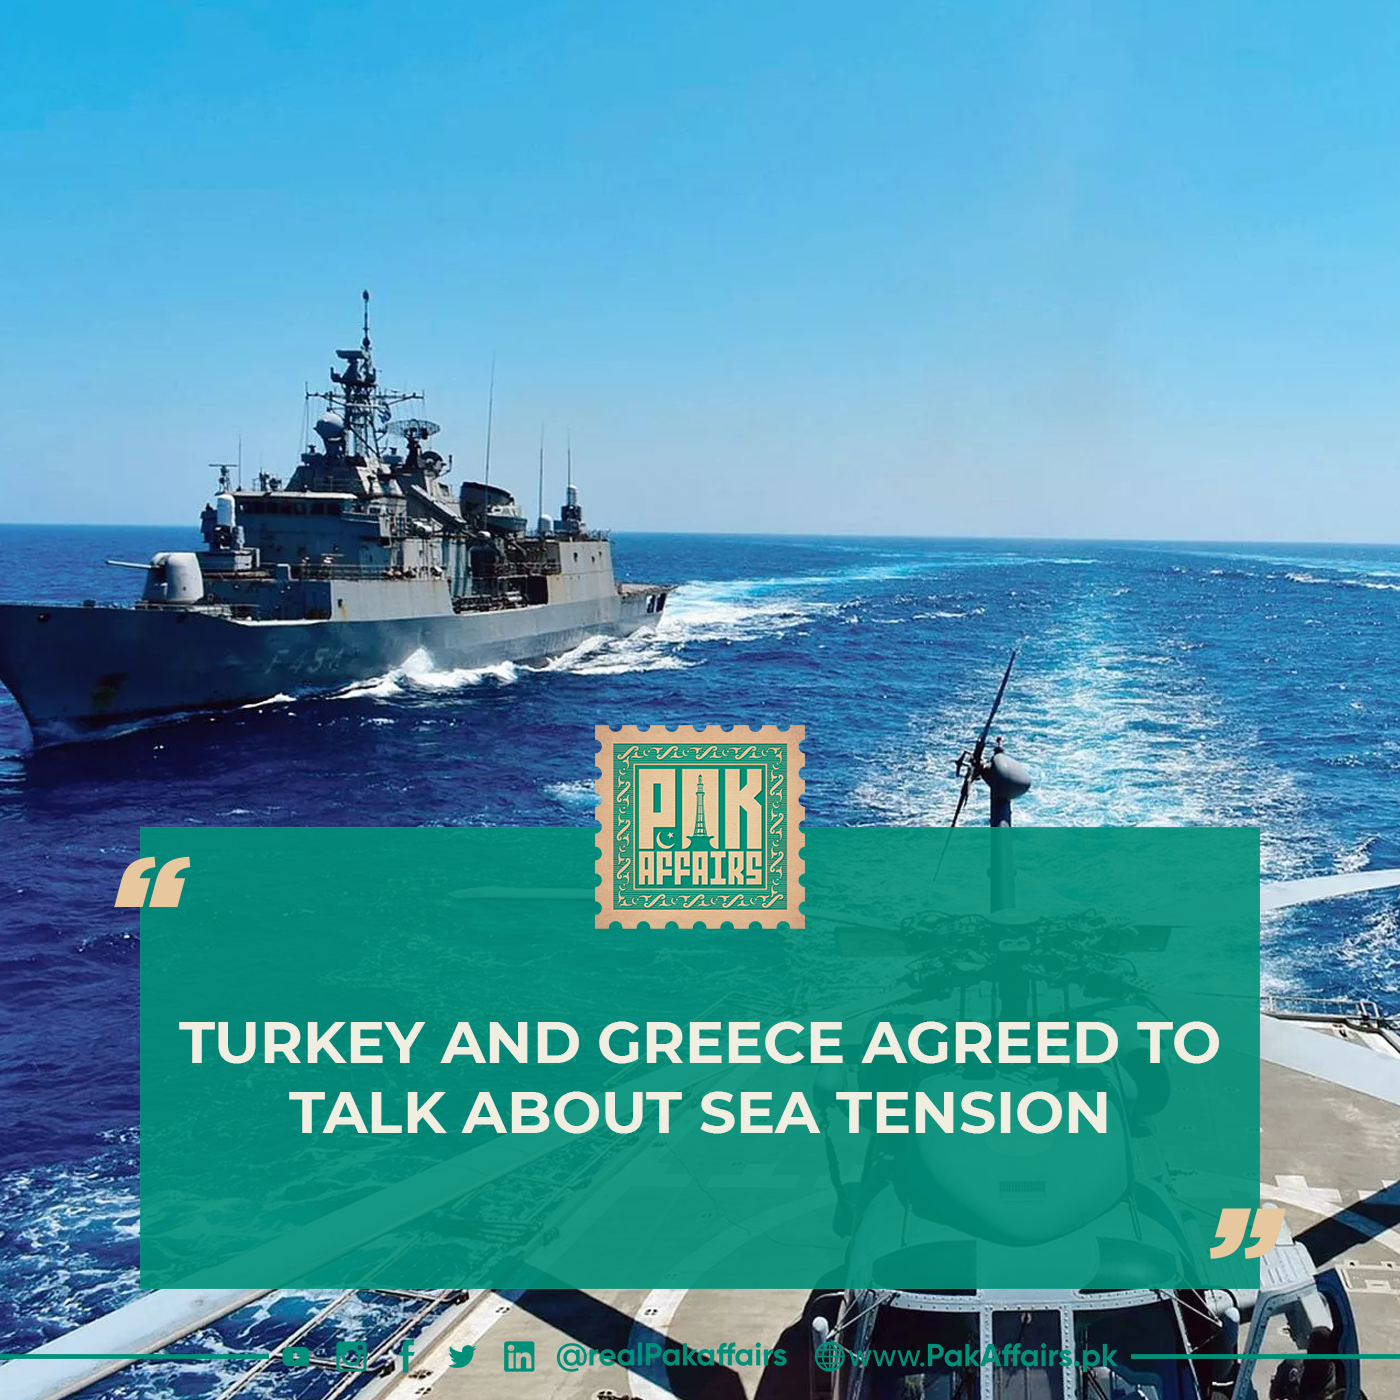 Turkey and Greece agreed to talk about sea tension